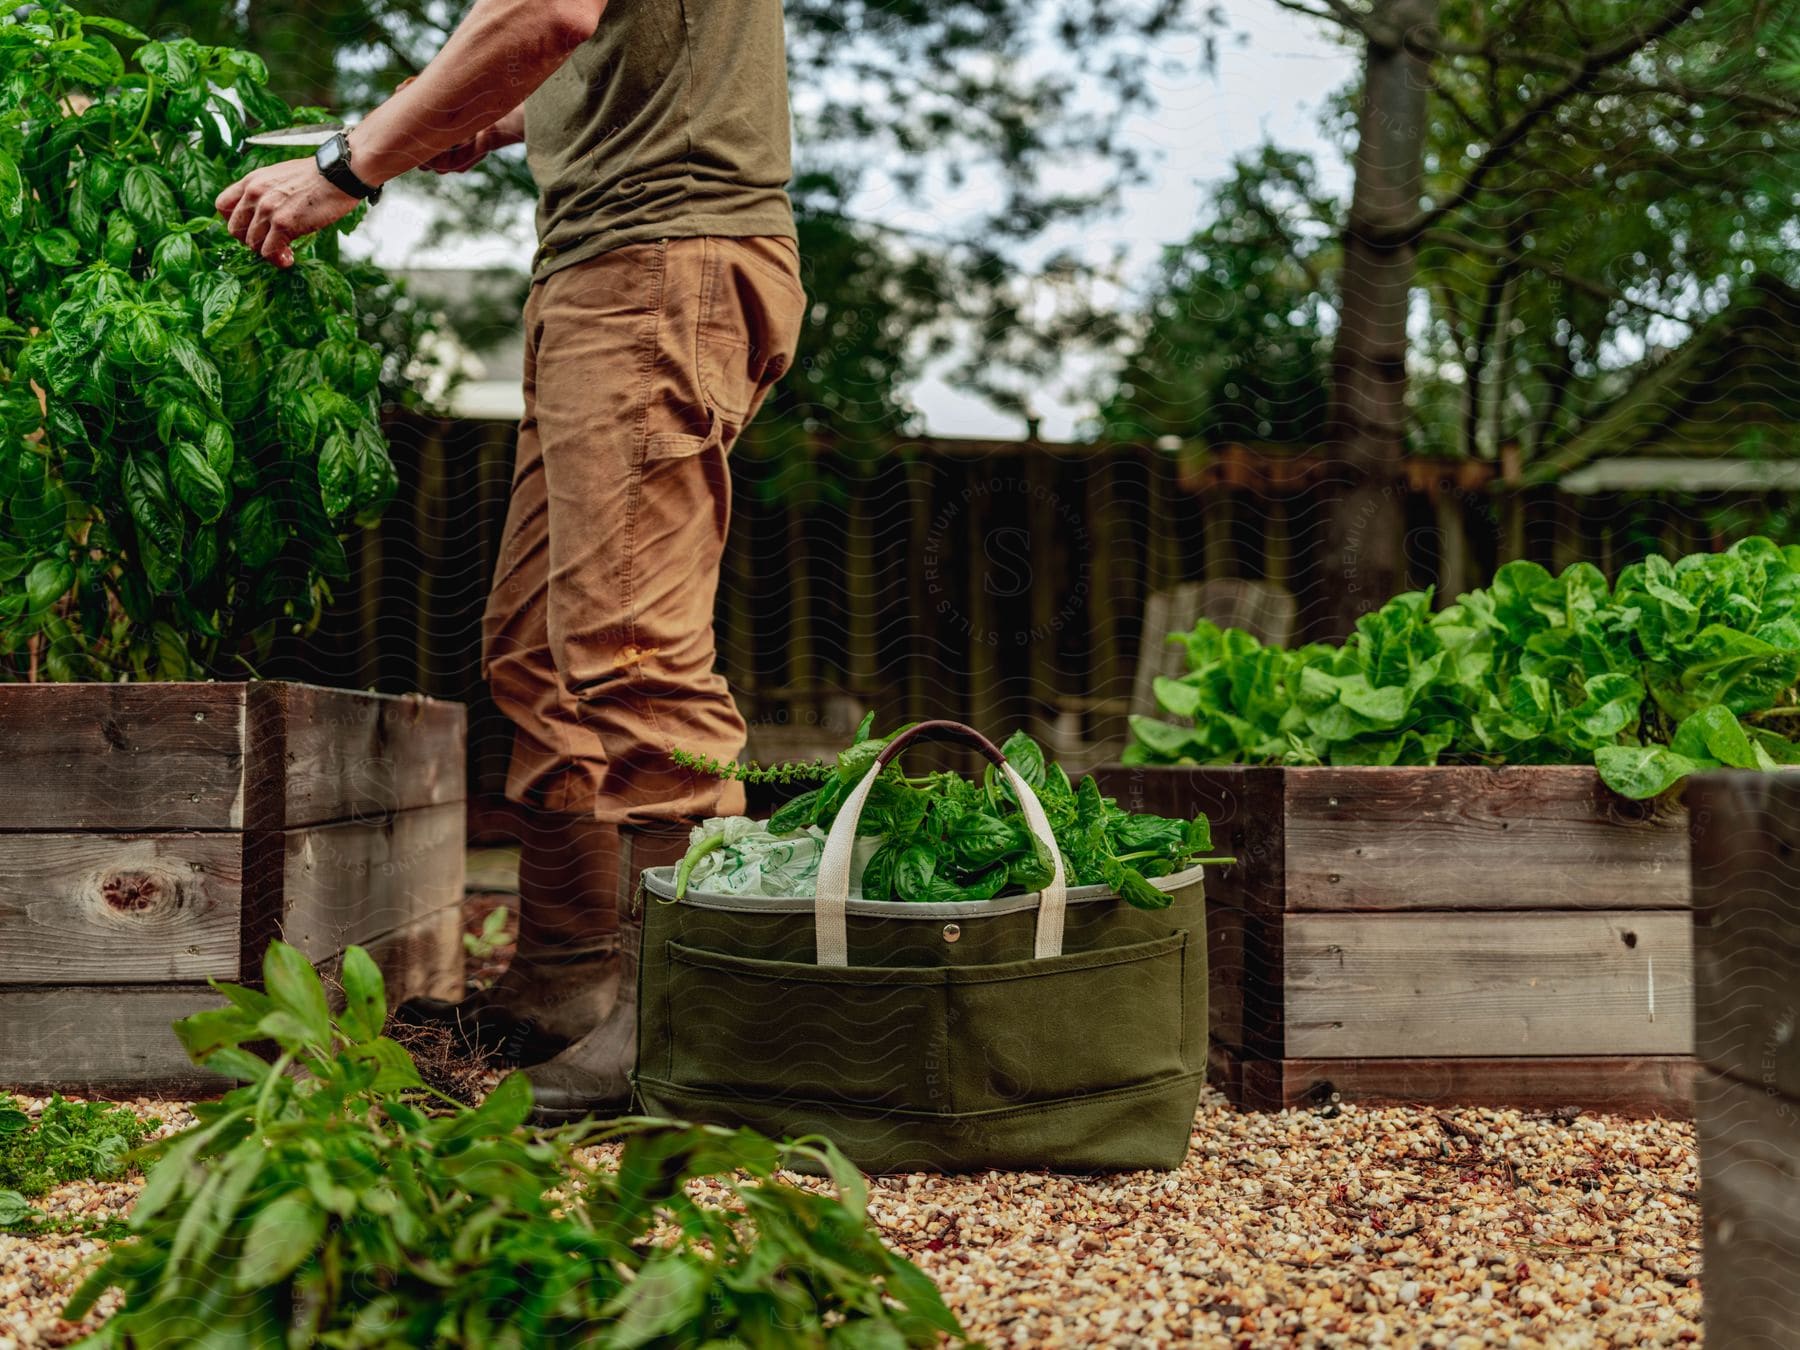 A man in a backyard garden holding a bag of harvested leafy green vegetables